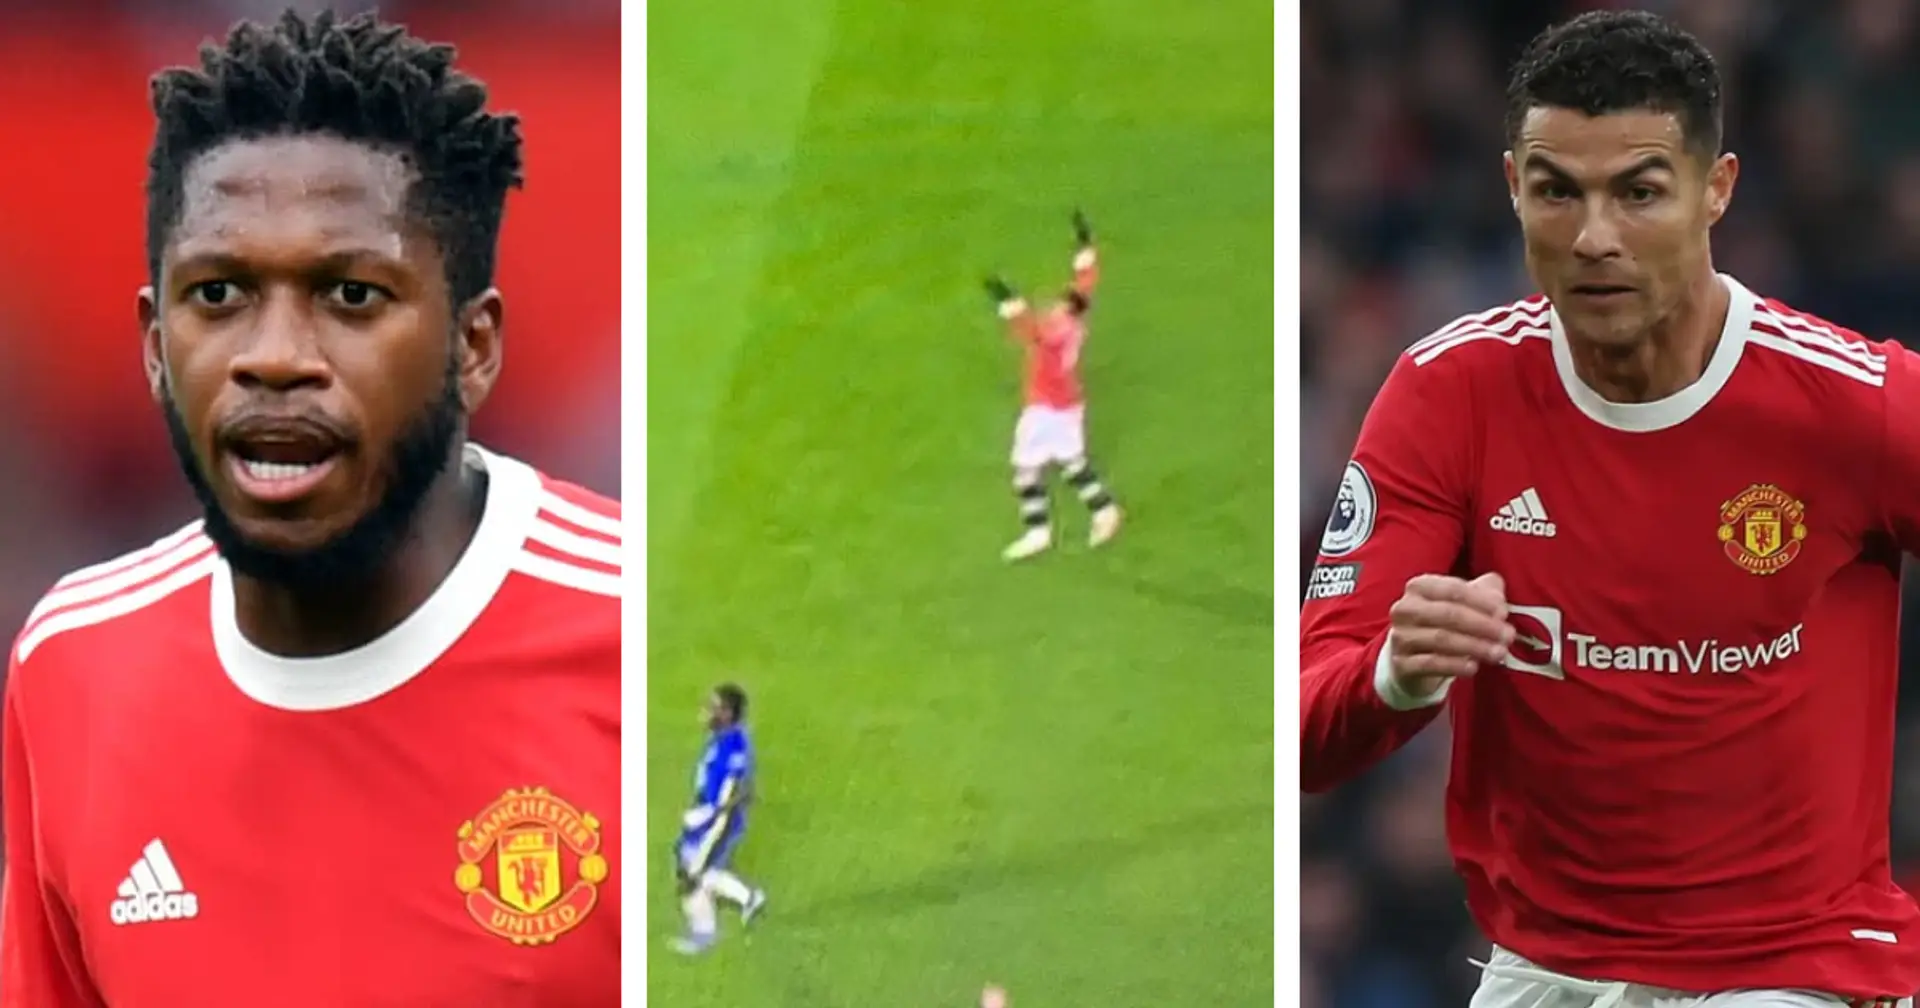 Why Fred didn't pass ball to Ronaldo in 87th minute vs Chelsea — explained